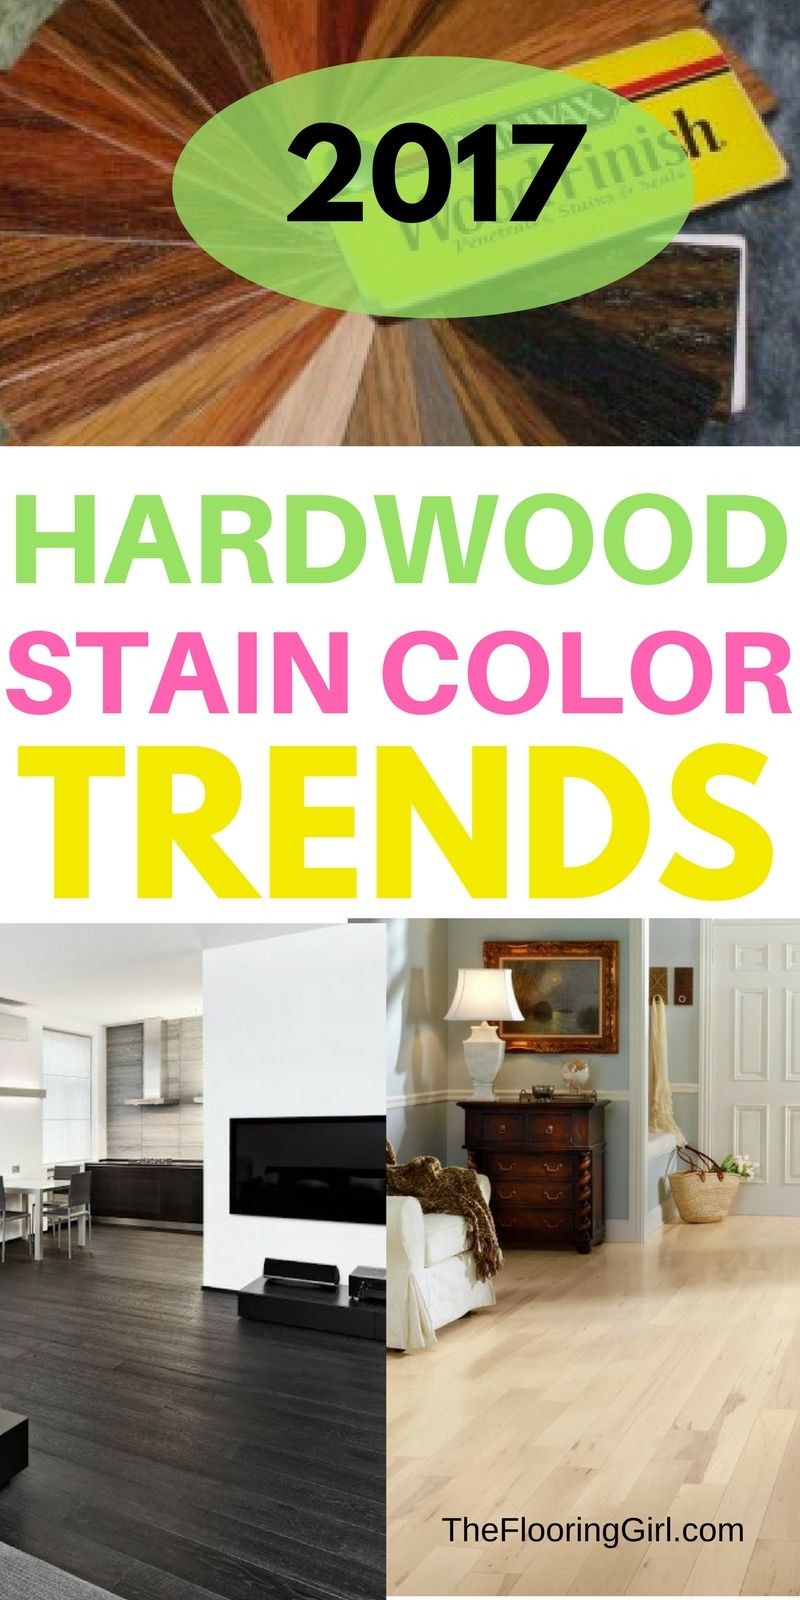 12 attractive This Old House Sanding Hardwood Floors 2024 free download this old house sanding hardwood floors of hardwood flooring stain color trends 2018 more from the flooring for hardwood flooring stain color trends for 2017 hardwood colors that are in style